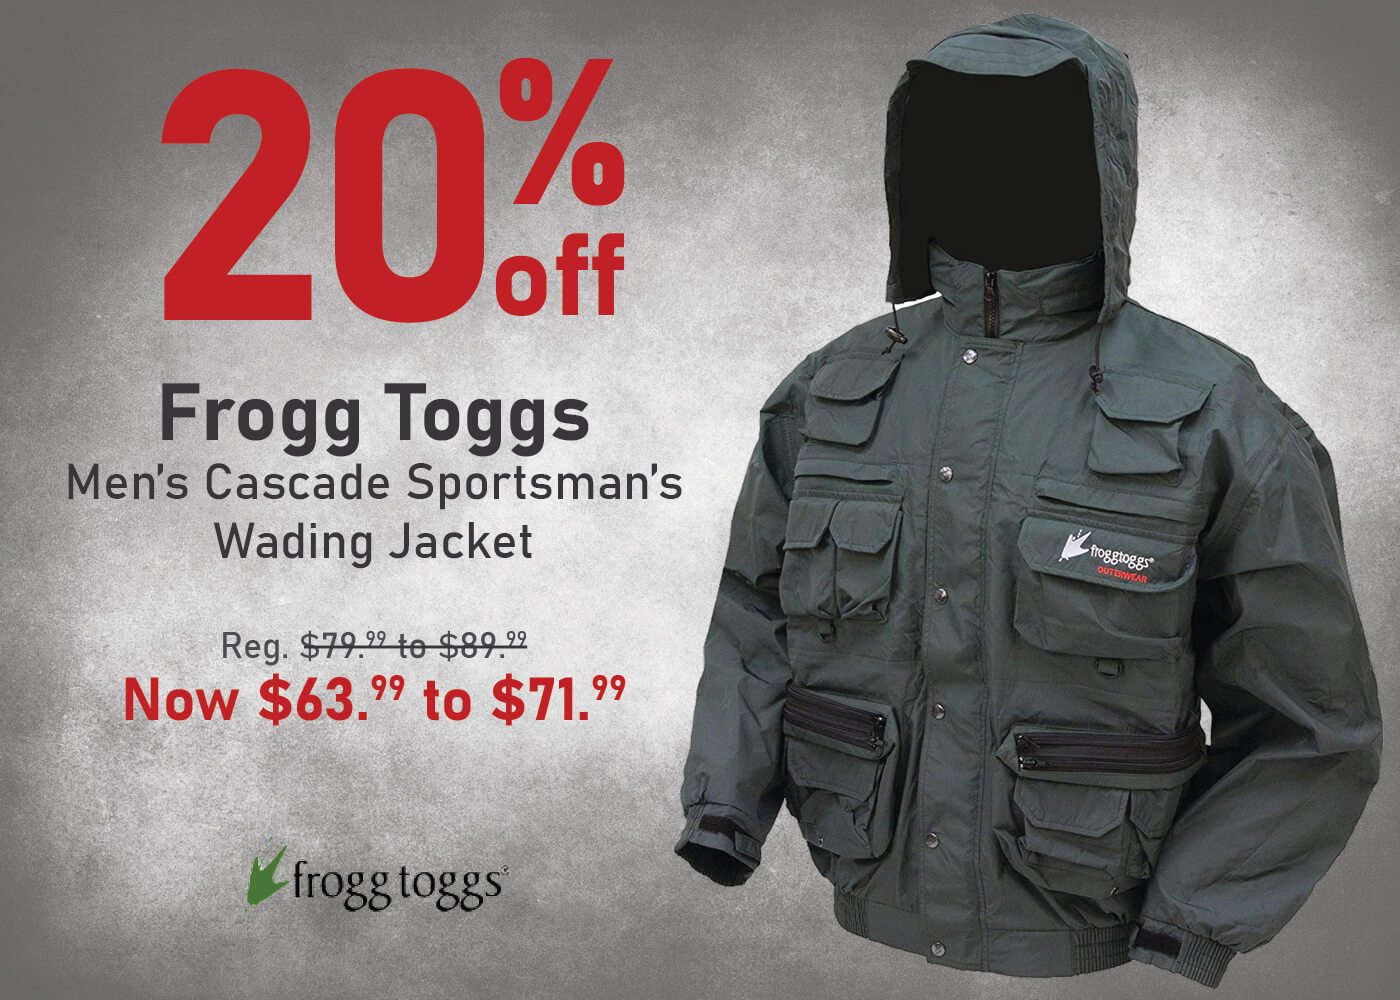 Save 20% on the Frogg Toggs Men's Cascade Sportsman's Wading Jacket